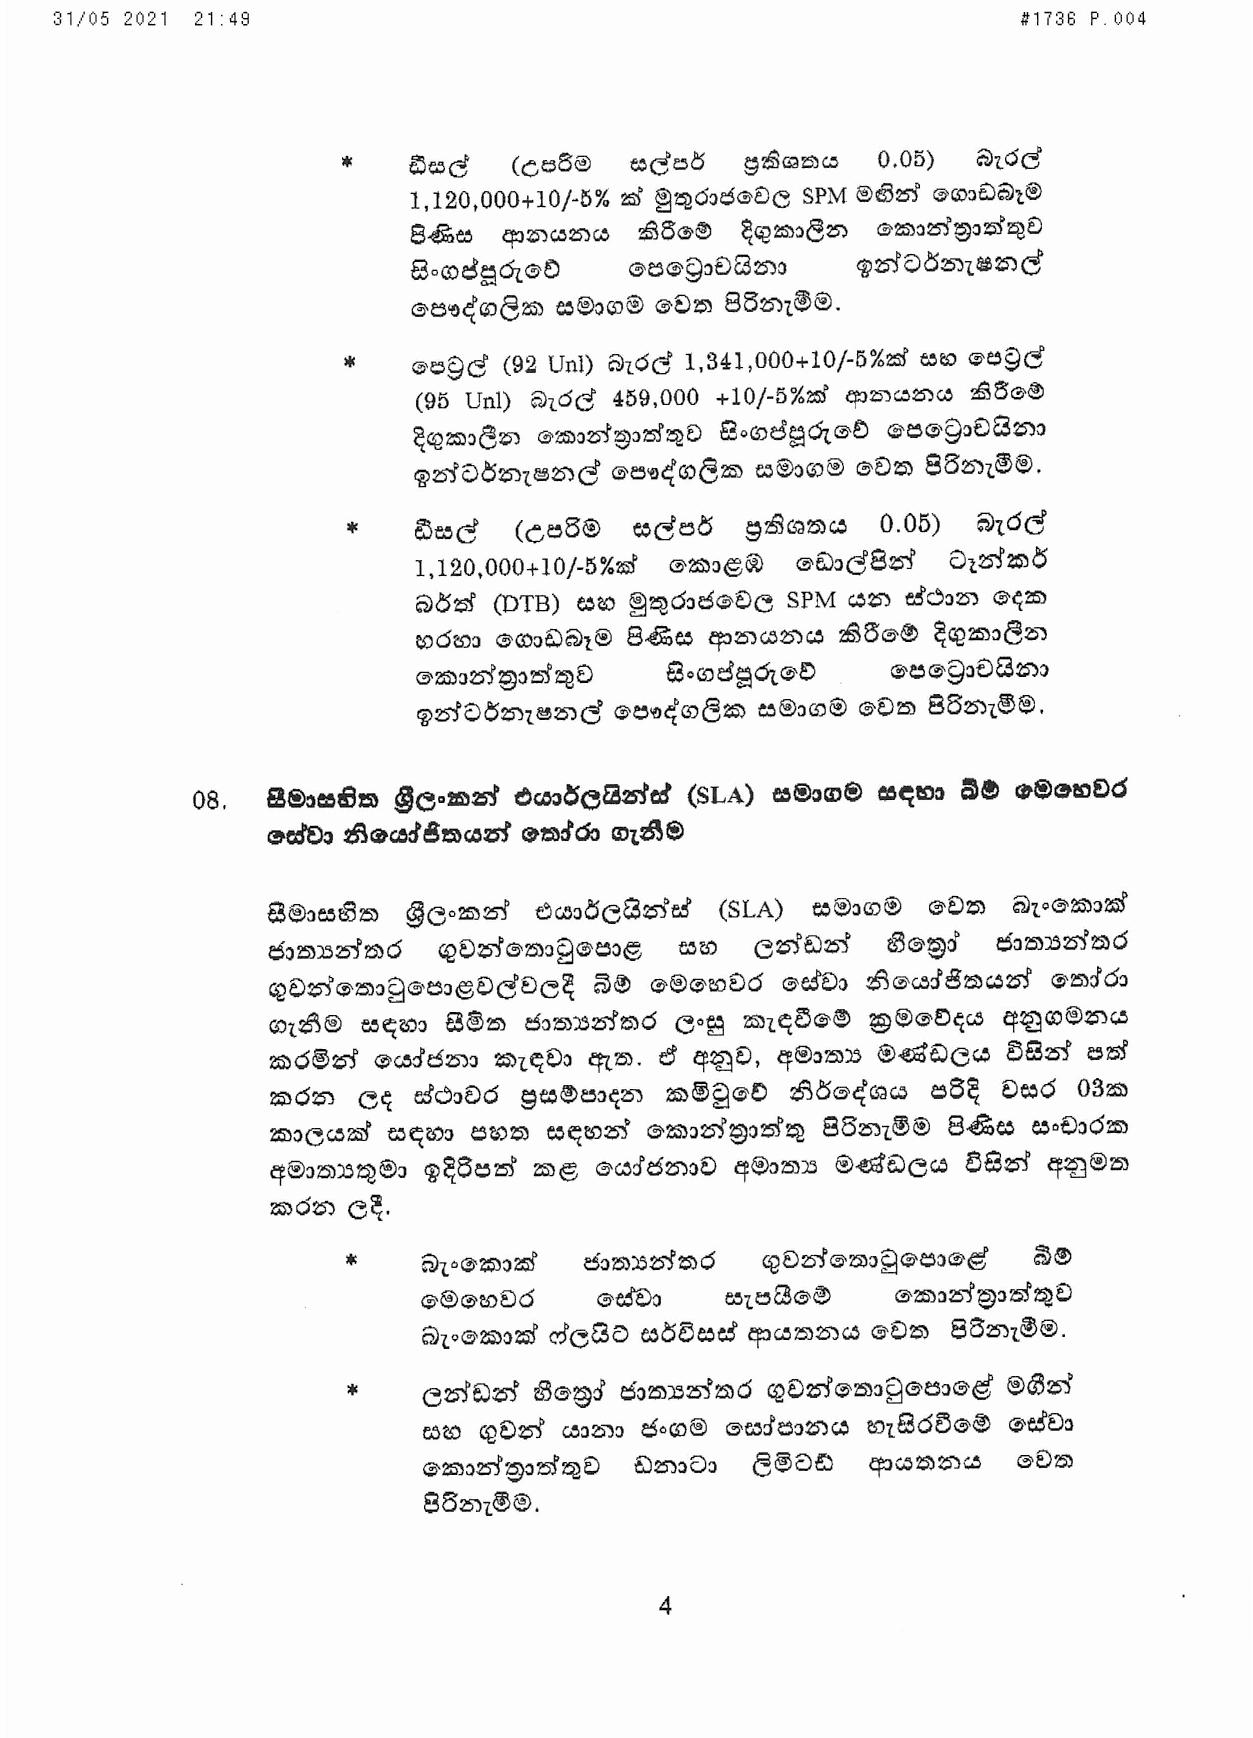 Cabinet Decision on 31.05.2021 page 004